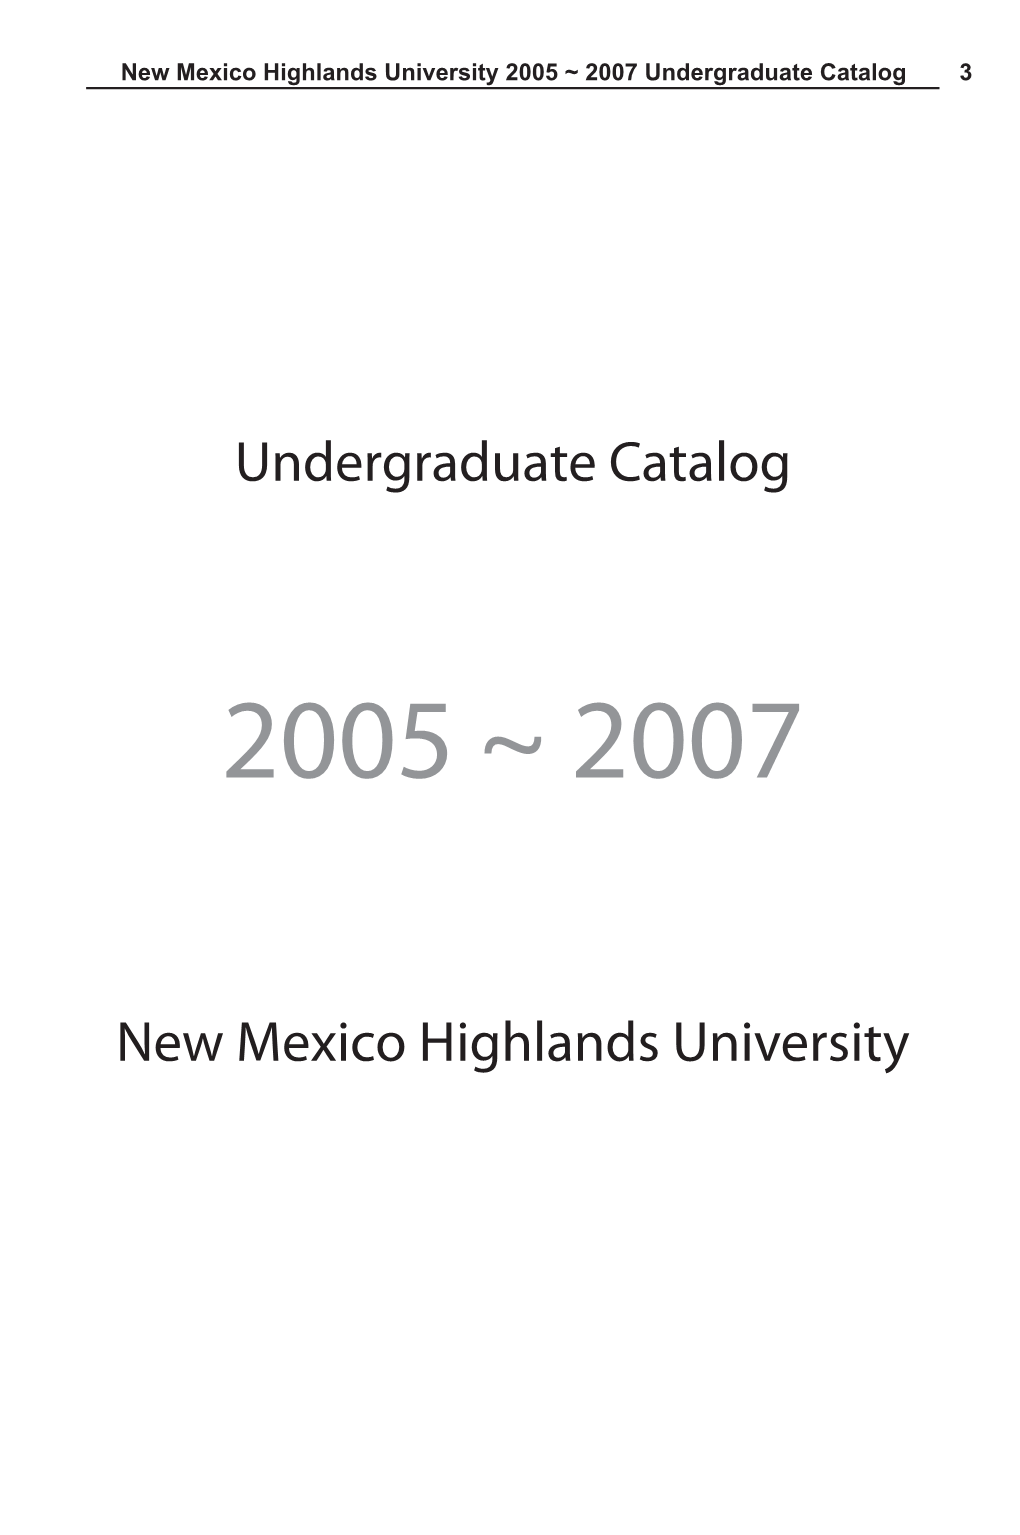 Undergraduate Catalog 2005-2007 Is a Description of New Mexico Highlands University’S Academic Pro- Grams and Courses of Instruction